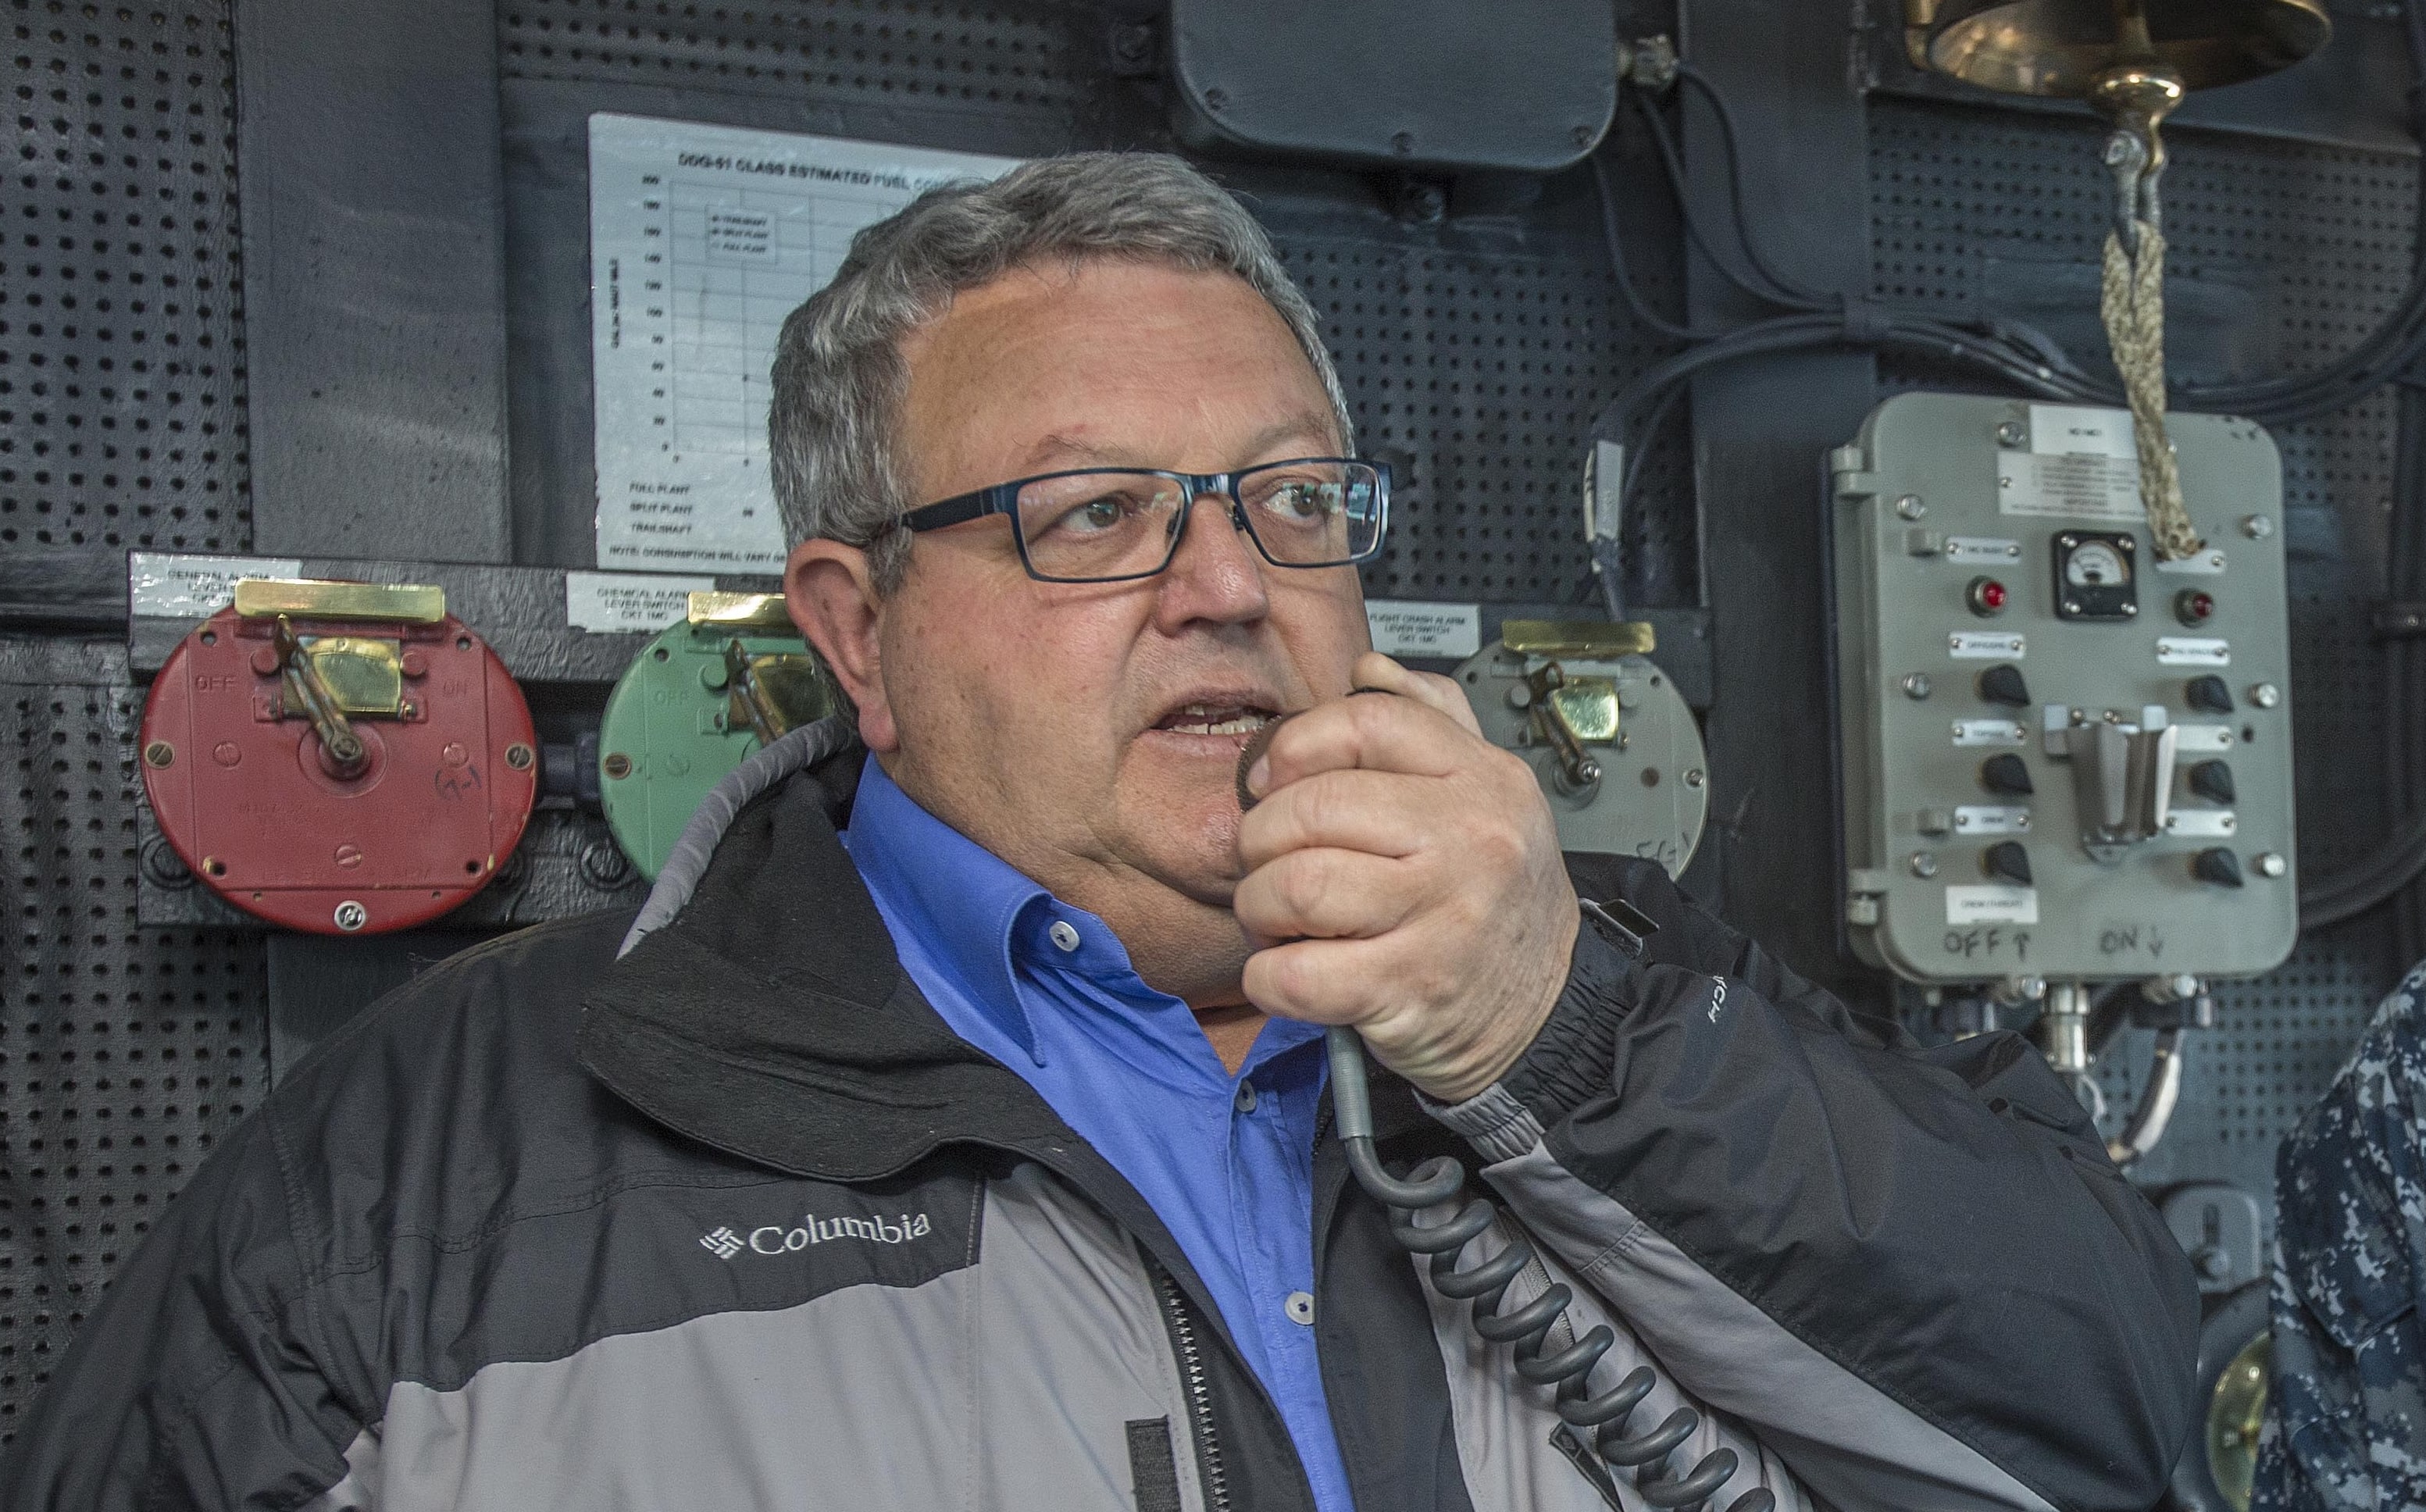 Acting Civil Defence Minister Gerry Brownlee thanks the crew of United States warship the USS Sampson, for their help in the earthquake response.